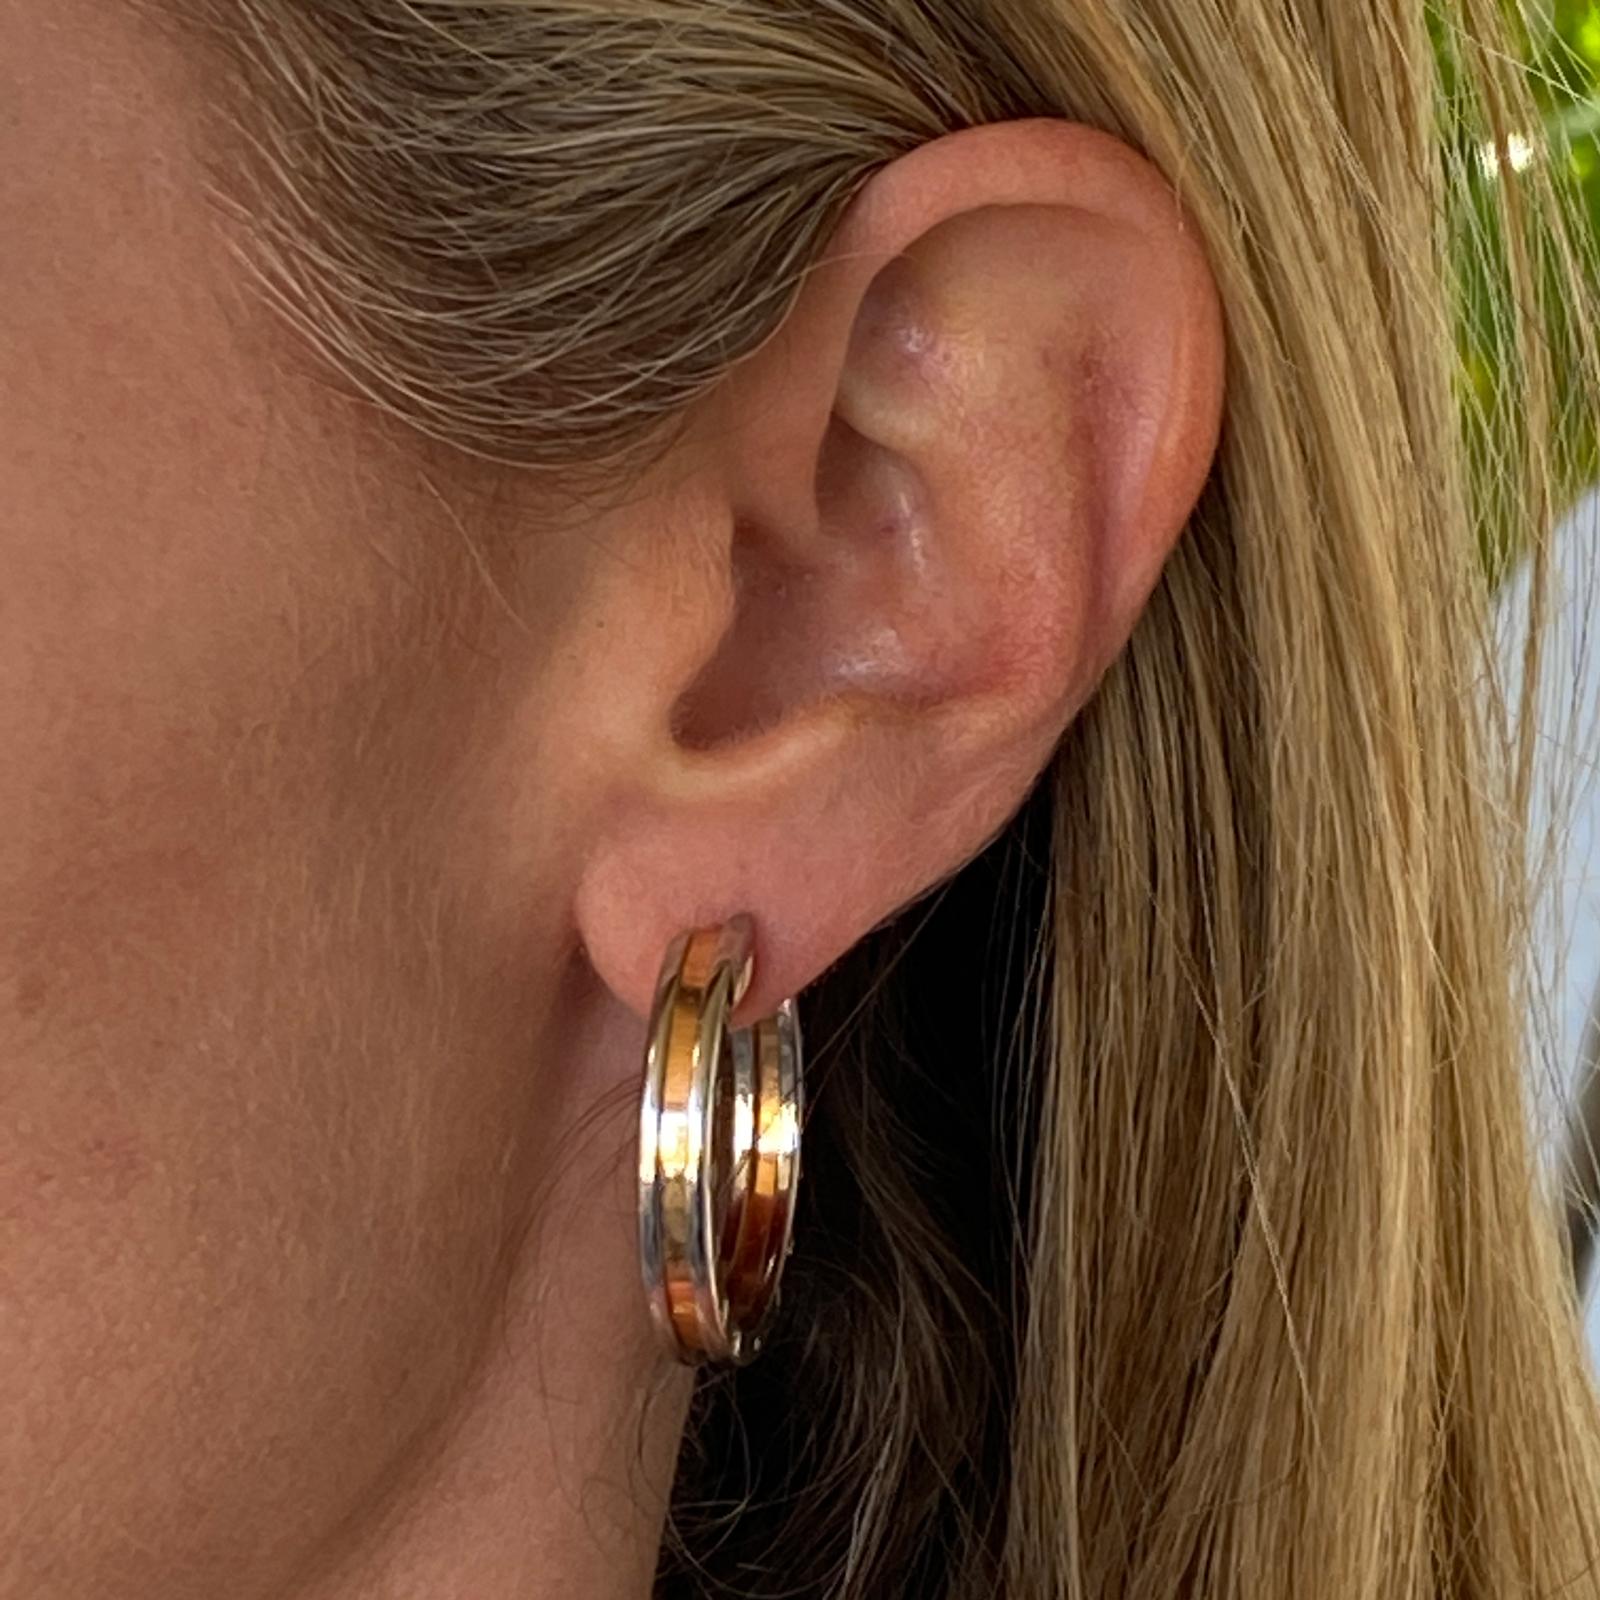 Bvlgari B.Zero1 hoop earrings fashioned in 18 karat rose gold and stainless steel. The hoops feature  the Bvlgari name, Made In Italy, and are marked for left and right ear. The hoops measure 30mm in diameter. 